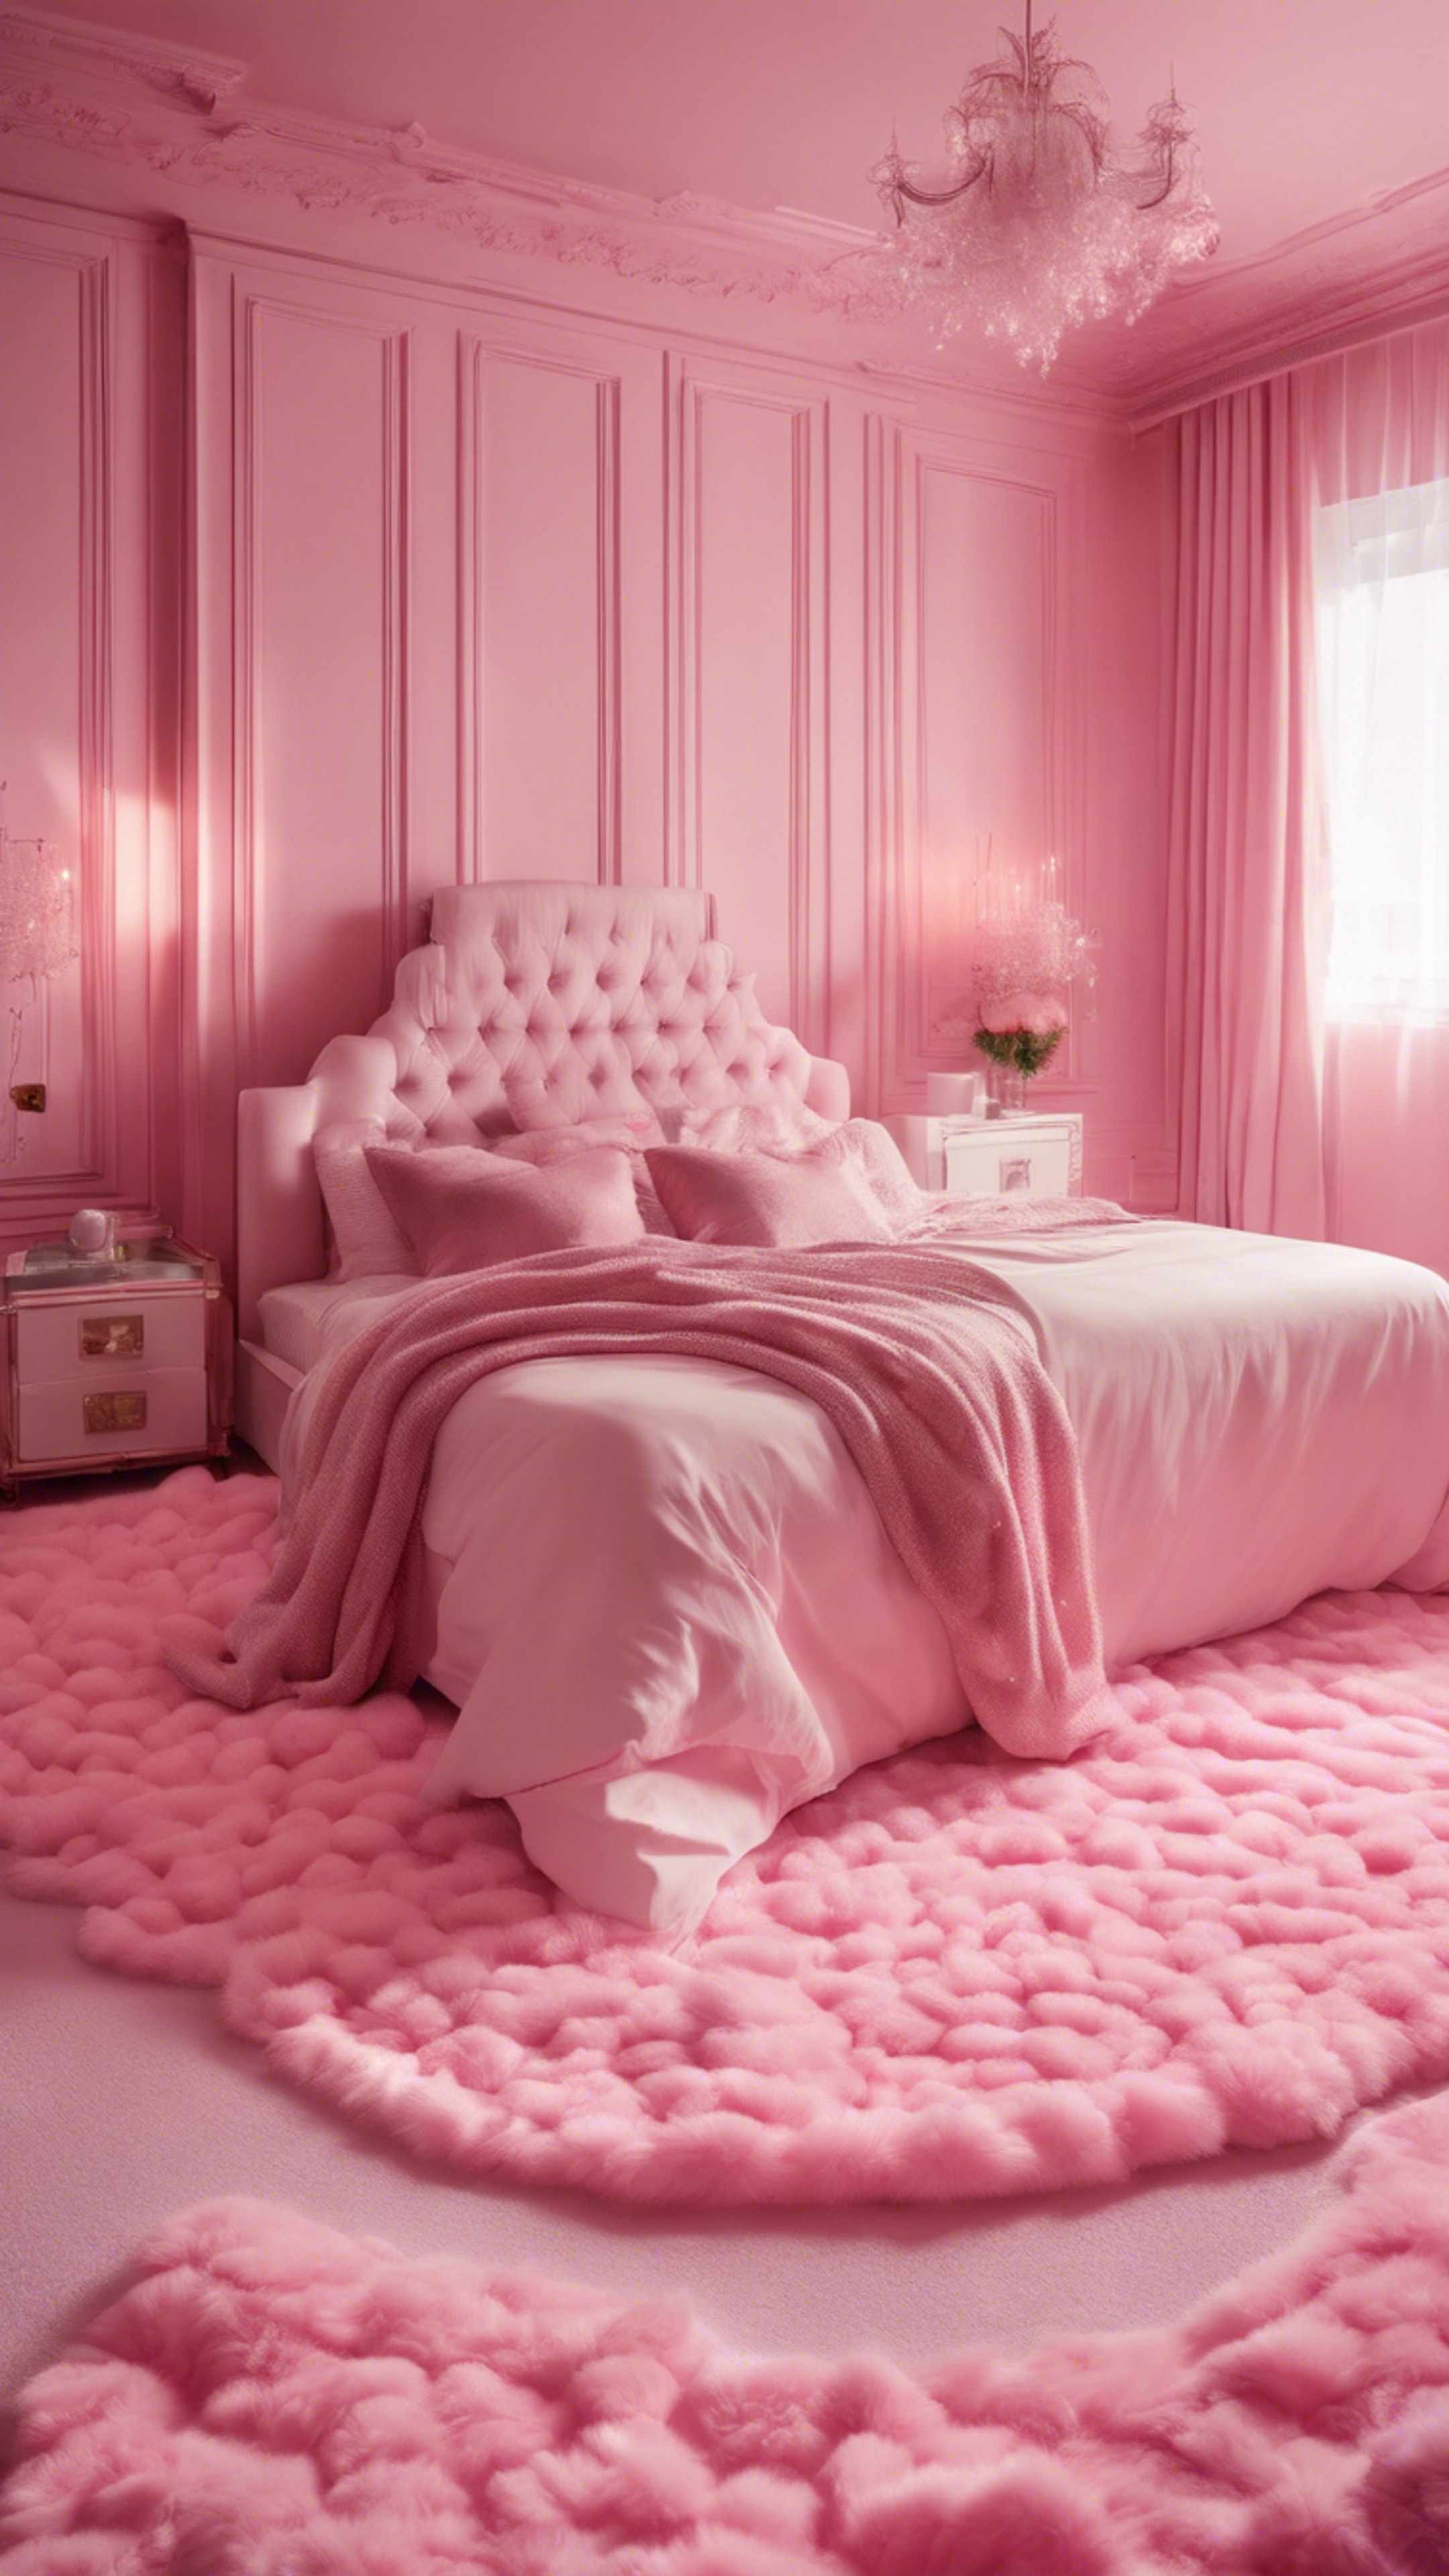 A Y2K inspired bedroom decorated entirely in light pink with a bubblegum pink fur carpet.壁紙[e75e7d2e5d164e369d80]